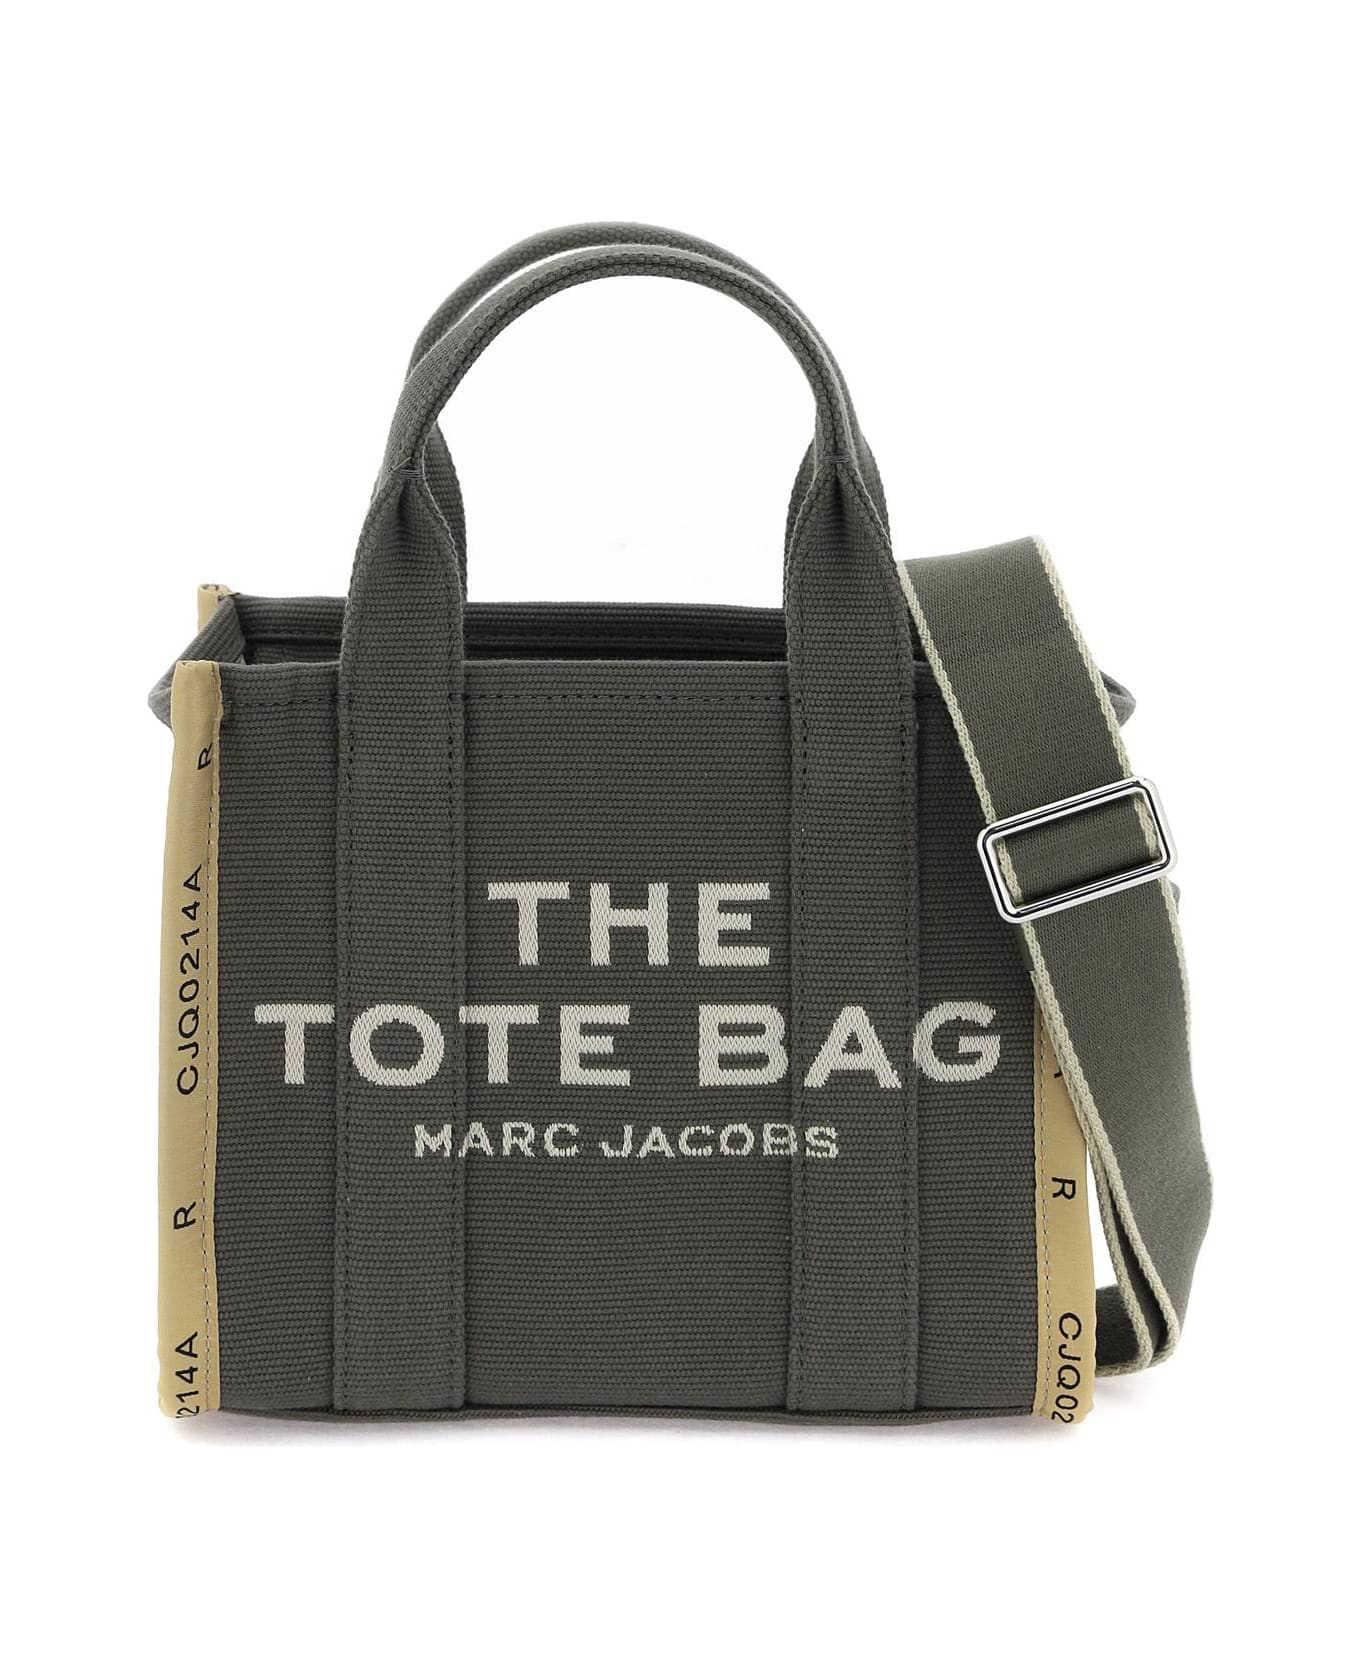 Marc Jacobs Traveler Tote In Green Cotton - BRONZE GREEN (Green)